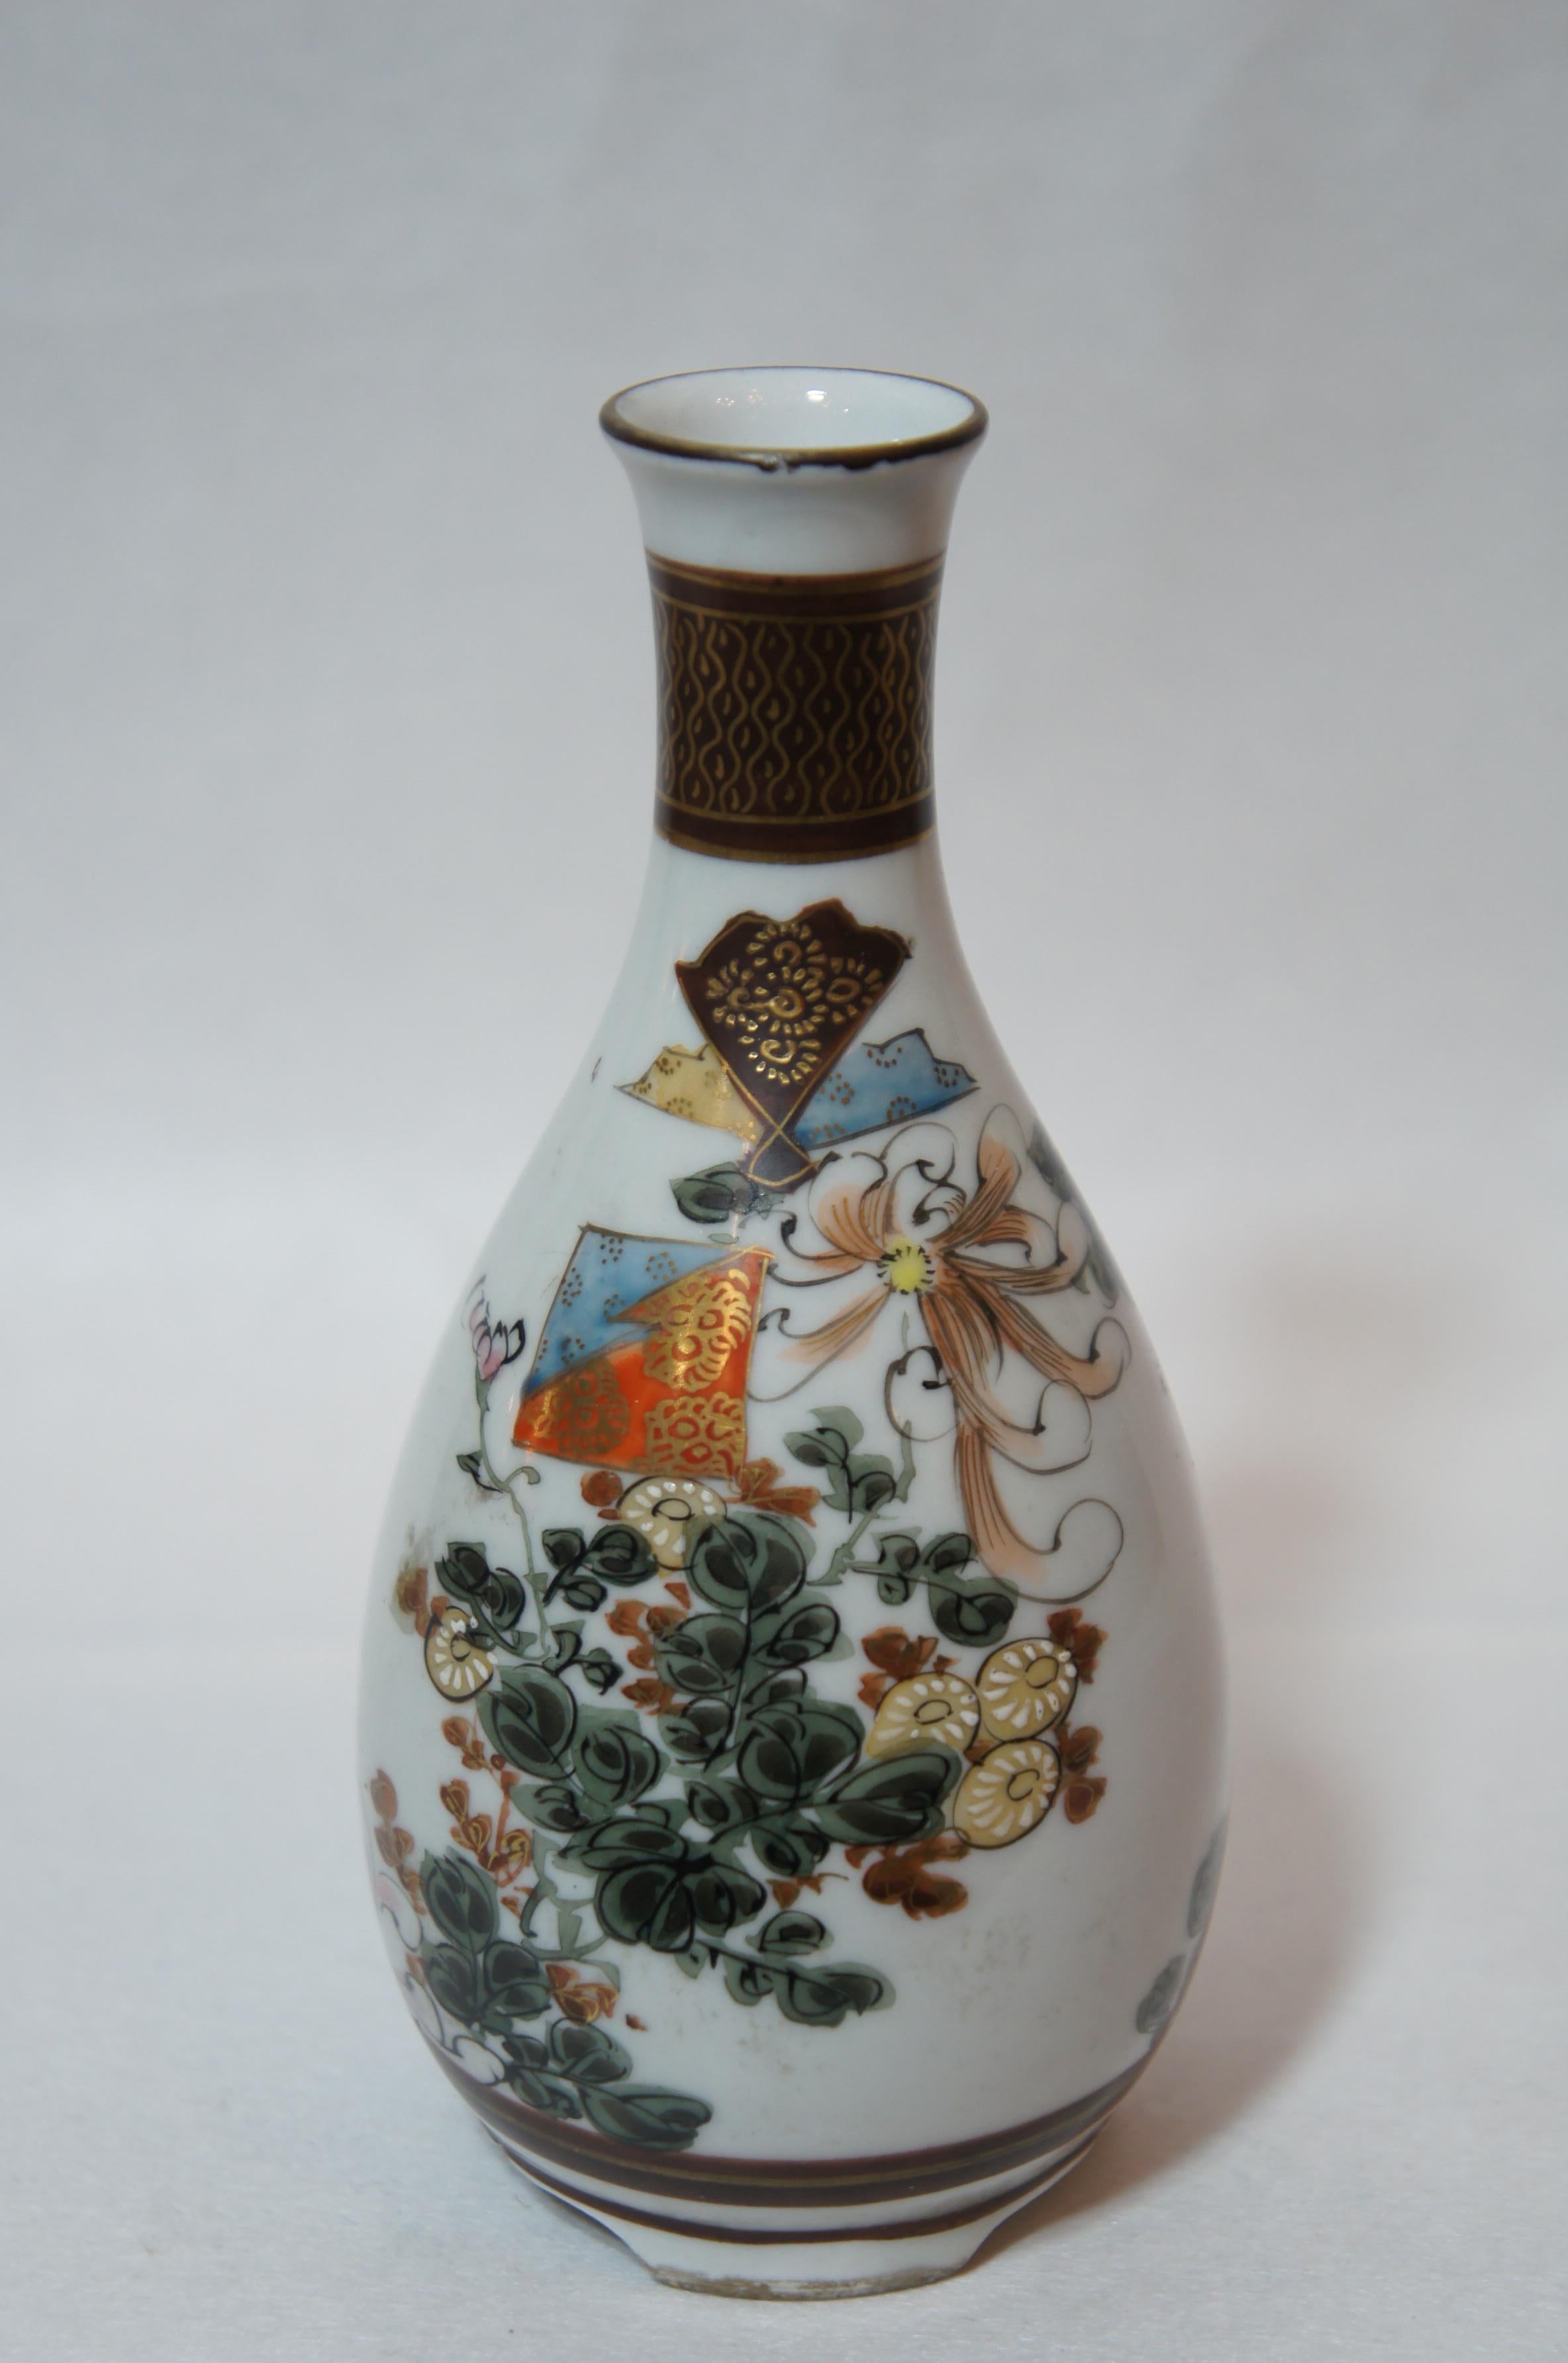 Beautiful Japanese Kutani Ware sake bottle (= Tokkuri).
Pattern of the picture is variety and is painted in detail by Japanese artisan.
In the bottom of the sake bottle, there is a mark of Kutani Ware.

Kutani ware is a style of Japanese